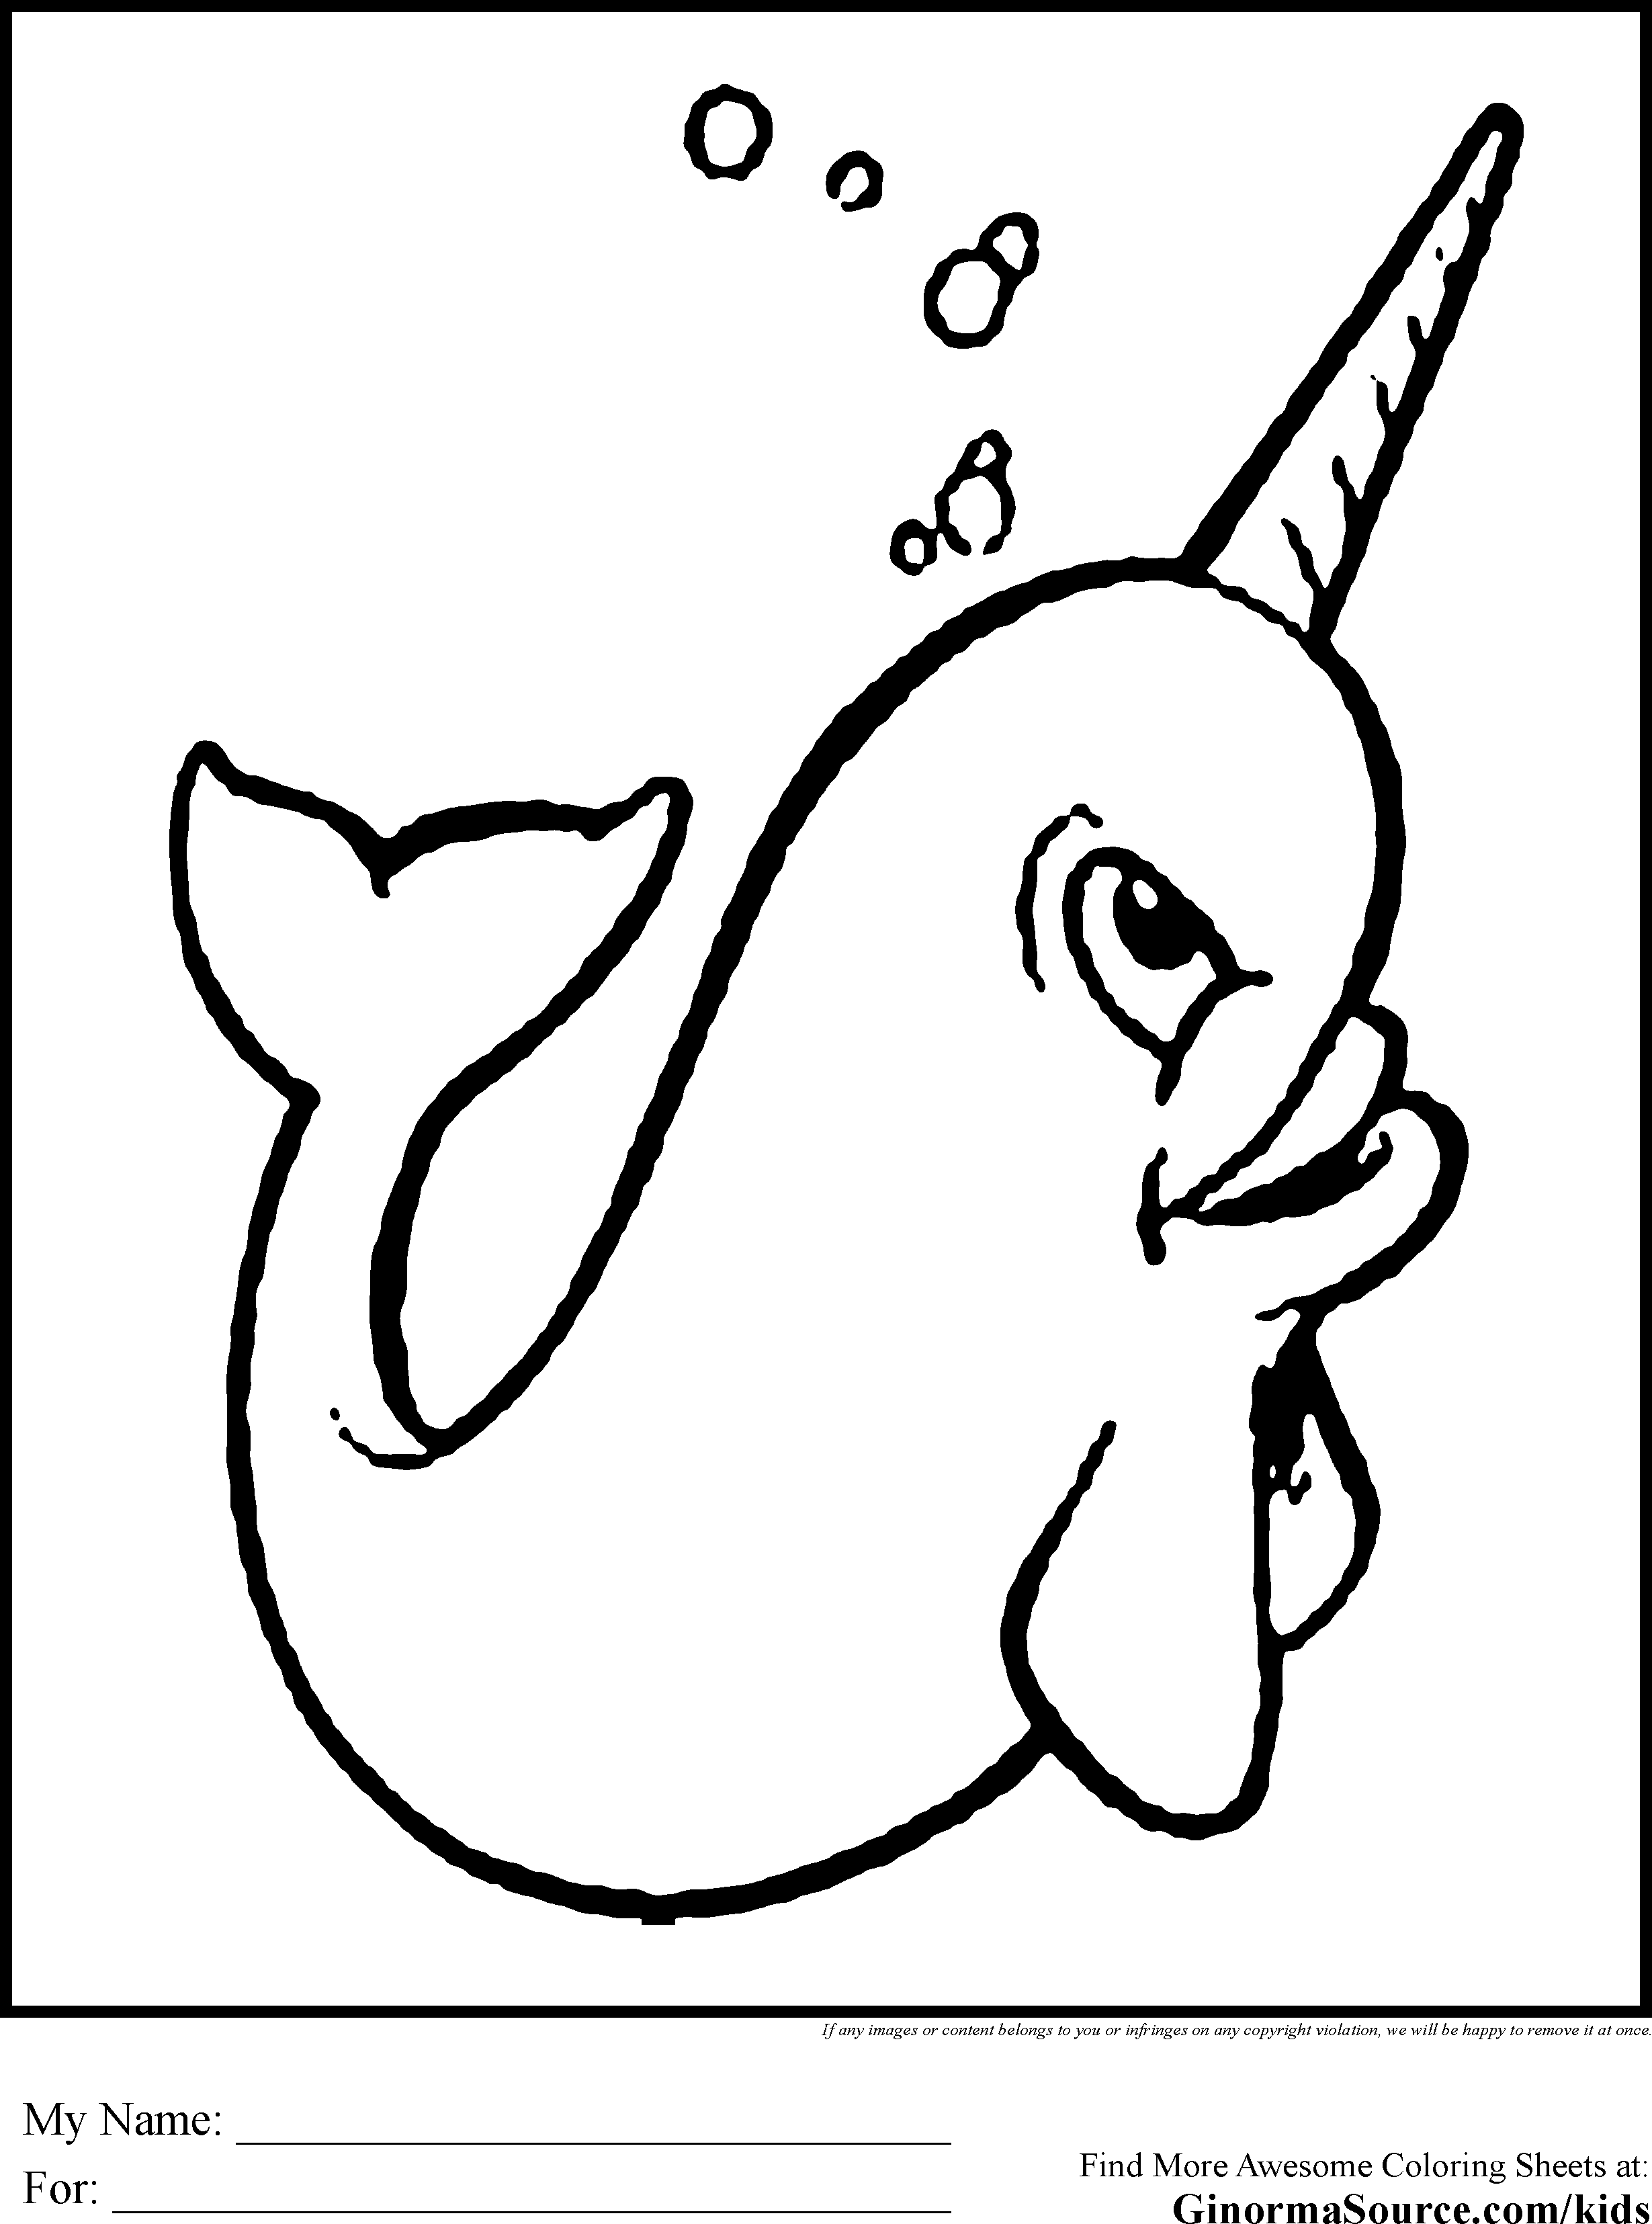 Narwhal coloring #11, Download drawings